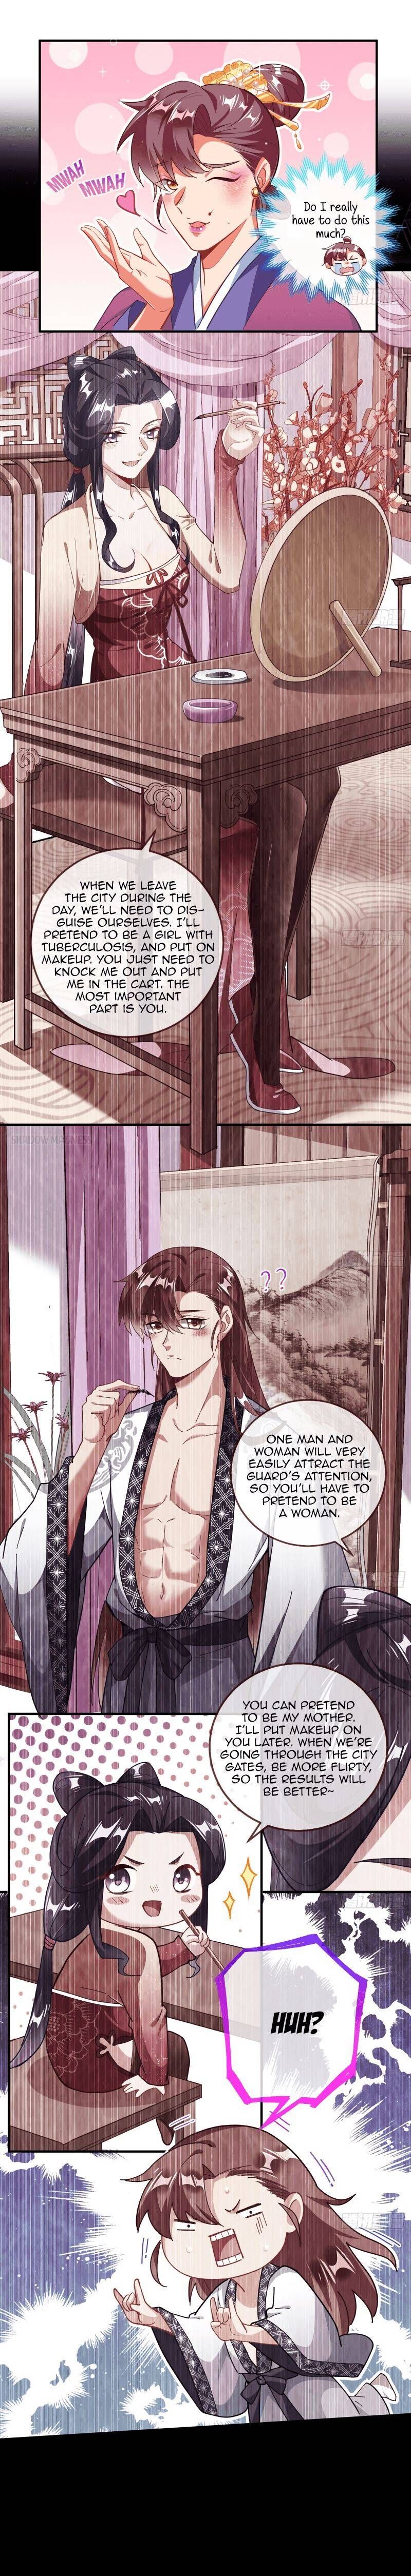 Cheating Men Must Die Chapter 303 page 3